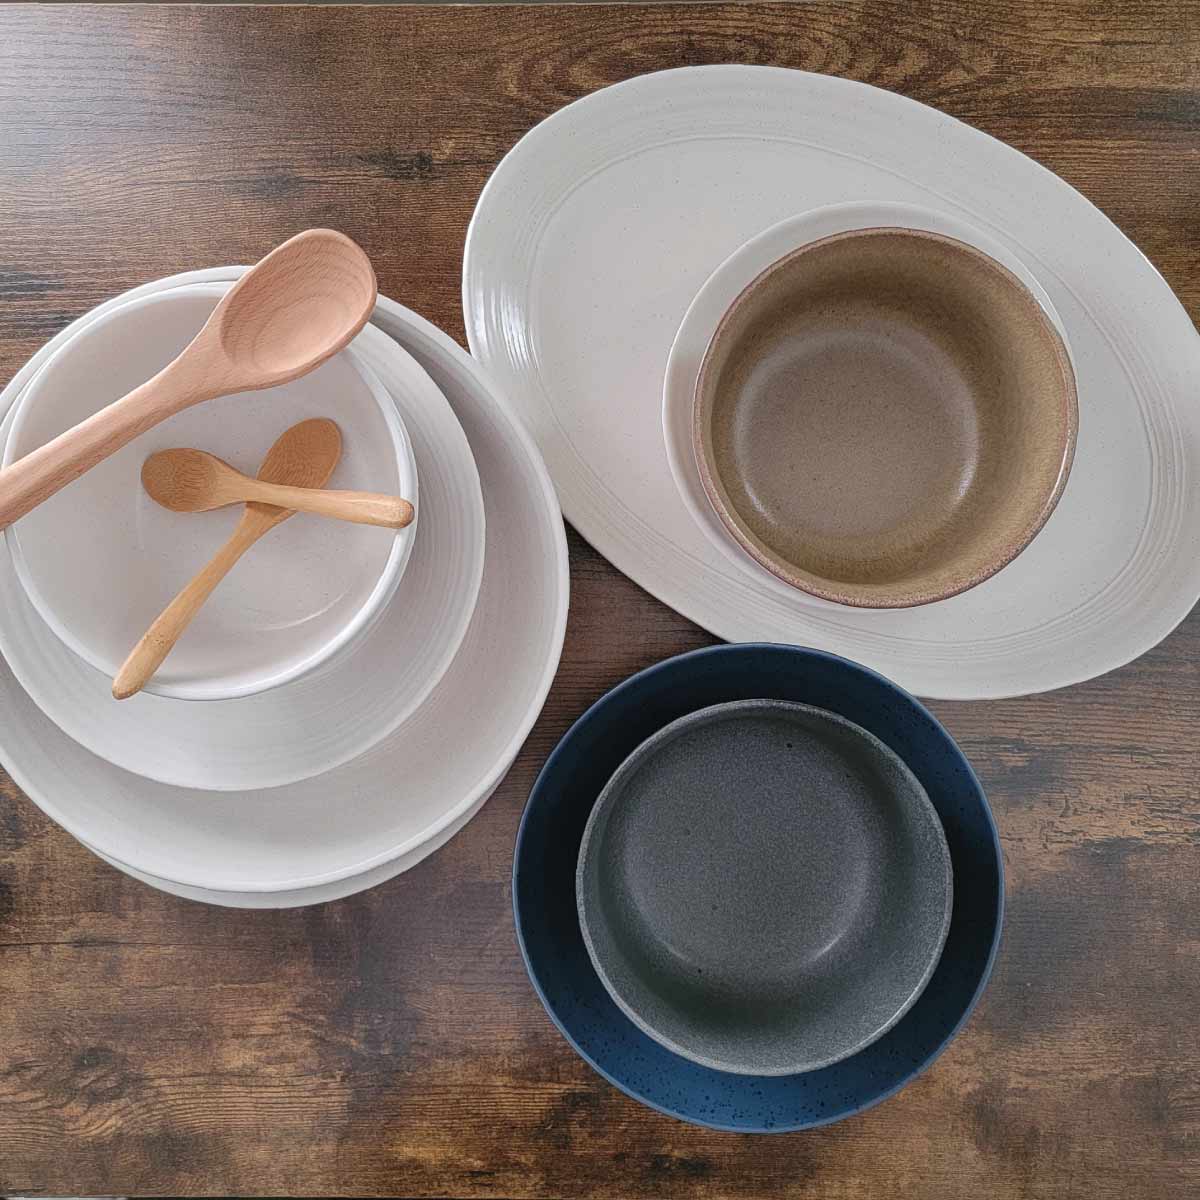 Bowls and plates of different sizes and colors along with small wooden spoons.